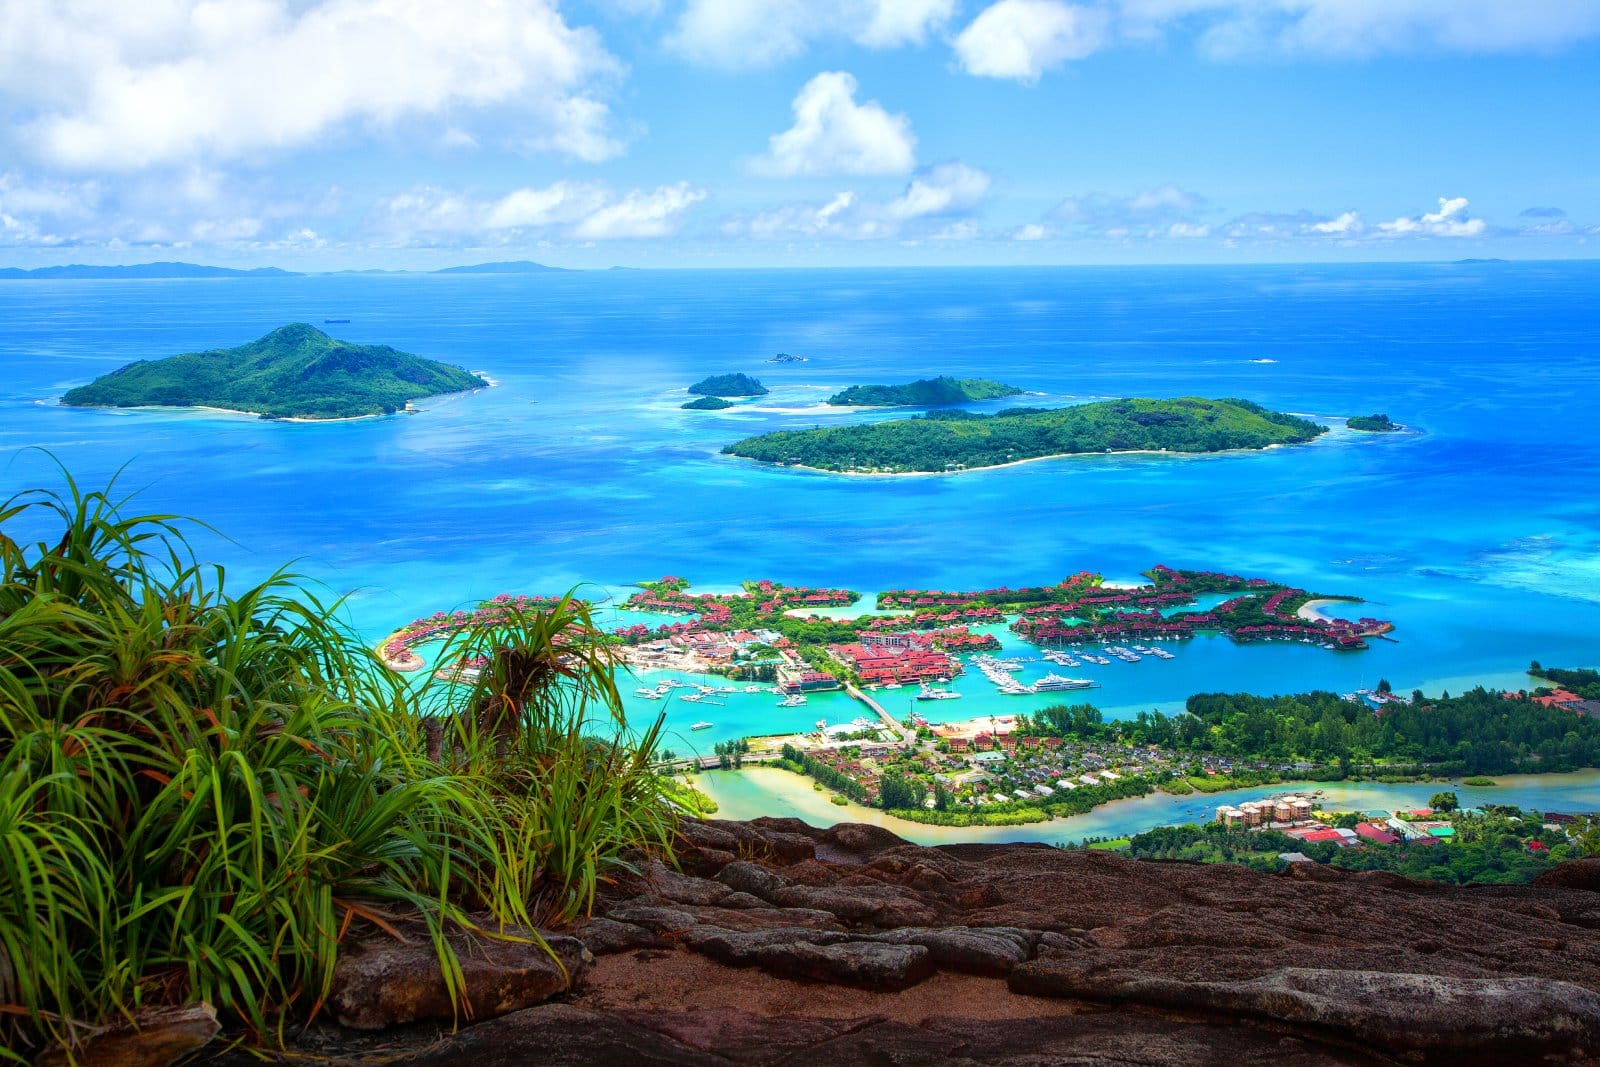 <p class="wp-caption-text">Image Credit: Shutterstock / Iryna Shpulak</p>  <p><span>The Seychelles, an archipelago of 115 islands in the Indian Ocean, is renowned for its clear waters, vibrant coral reefs, and diverse marine life. The islands offer a variety of snorkeling experiences, from the shallow, sheltered reefs ideal for beginners to more adventurous sites with stronger currents. The Seychelles’ commitment to environmental conservation ensures that its marine ecosystems remain healthy and vibrant.</span></p> <p><b>Insider’s Tip: </b><span>Visit the Sainte Anne Marine National Park, where you can snorkel among hundreds of fish species and pristine coral gardens within a protected reserve.</span></p> <p><b>When to Travel: </b><span>The best snorkeling conditions in the Seychelles are from April to May and from October to November when the water is calmest and visibility is at its peak.</span></p> <p><b>How to Get There: </b><span>International flights arrive at Seychelles International Airport on Mahé, the largest island. From Mahé, inter-island ferries and domestic flights provide access to the other islands.</span></p>